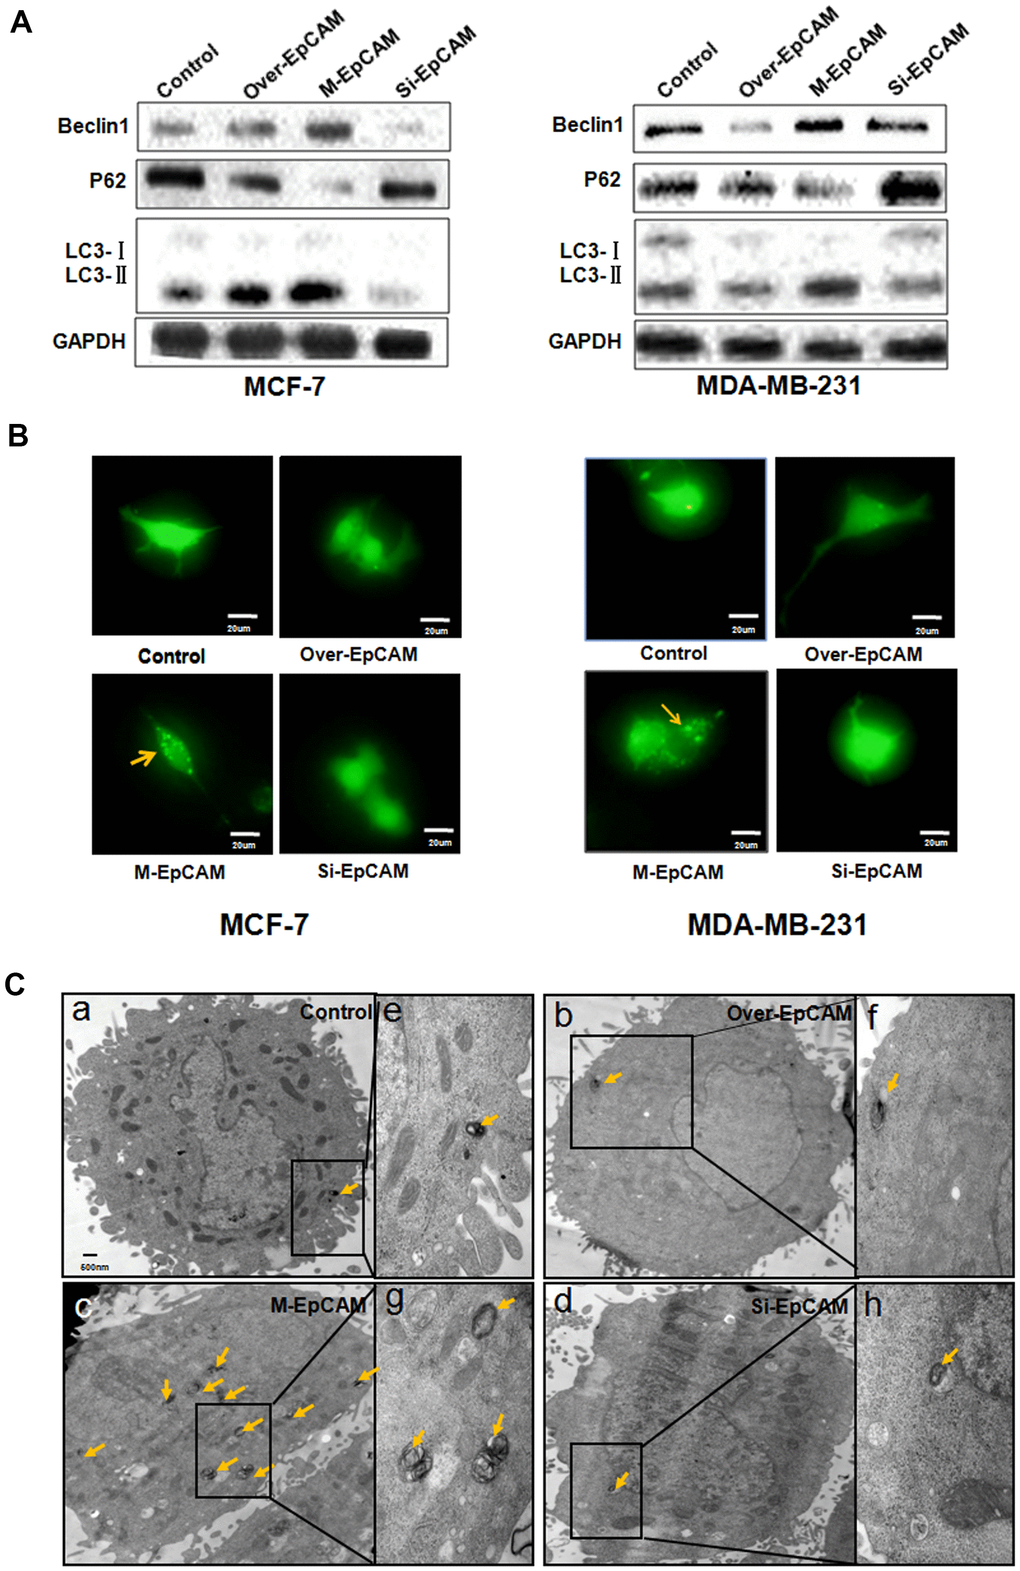 Effect of EpCAM on autophagy. (A) MCF-7 cells and MDA-MB-231 cells were treated with pCMV-SPORT 6-EpCAM plasmid, si-EpCAM sequence and M-EpCAM plasmid for 48 hr. Whole cell lysates were subjected to western blot to detect the expression of Beclin 1, p62 and the conversion from LC3-I to LC3-II. (B) MCF-7 cells and MDA-MB-231 cells were transfected with pCMV-SPORT 6-EpCAM plasmid or si-EpCAM sequence or M-EpCAM plasmid and pGFP-LC3 plasmid for 48 hr, images were collected. After transfection for 24 hr, the cells were observed under an inverted microscope. Arrow depicted the autophagosome. (C) Representative transmission electron microscopy images depicting ultrastructures of MCF-7 cells which were transfected with pCMV-SPORT 6-EpCAM plasmid, si-EpCAM sequence and M-EpCAM plasmid, respectively. (e–h) depicted boxed sections in panels (a–d) at a higher magnification, respectively. Arrows indicate autolysosomes.